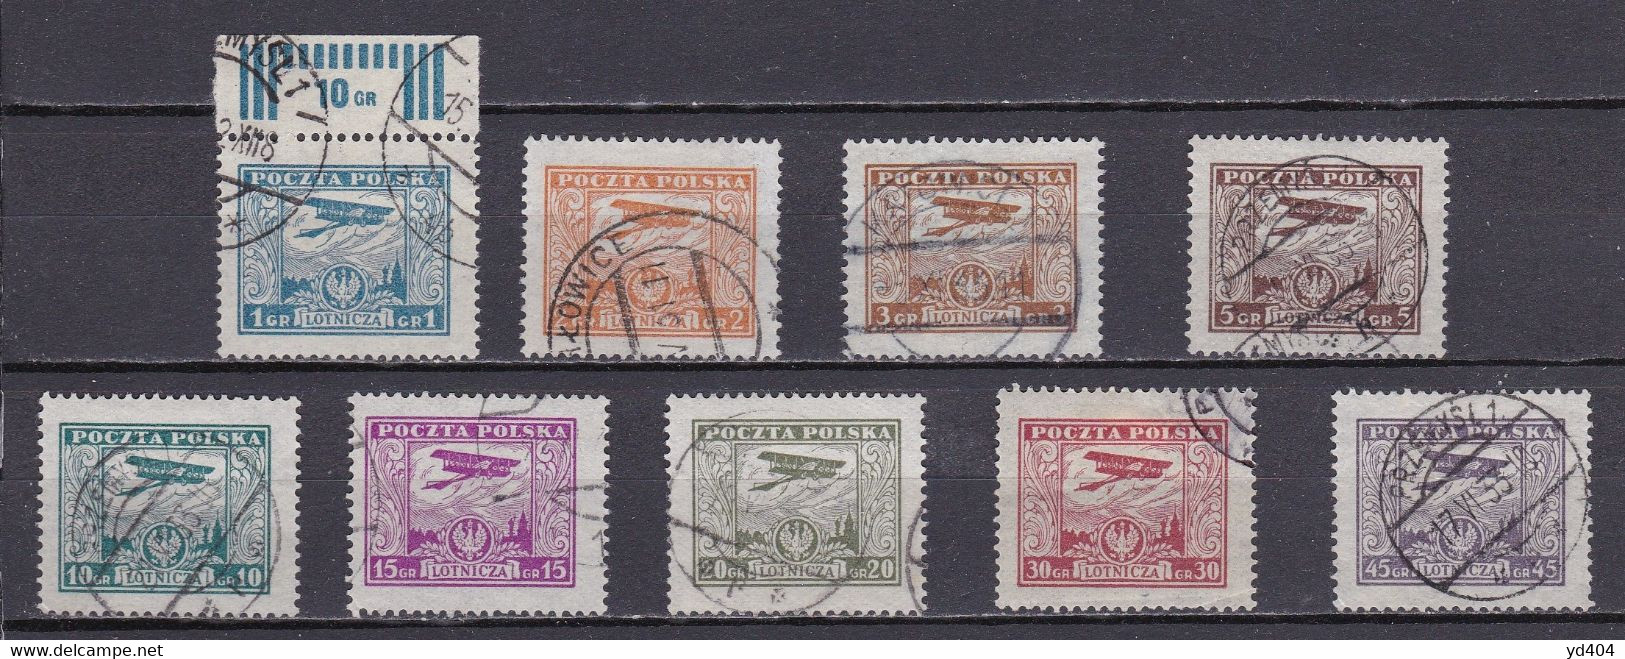 PL301 – POLAND – AIRMAIL - 1925 – PLANE OVER WARSAW - SG # 252/60 USED 51,75 € - Used Stamps